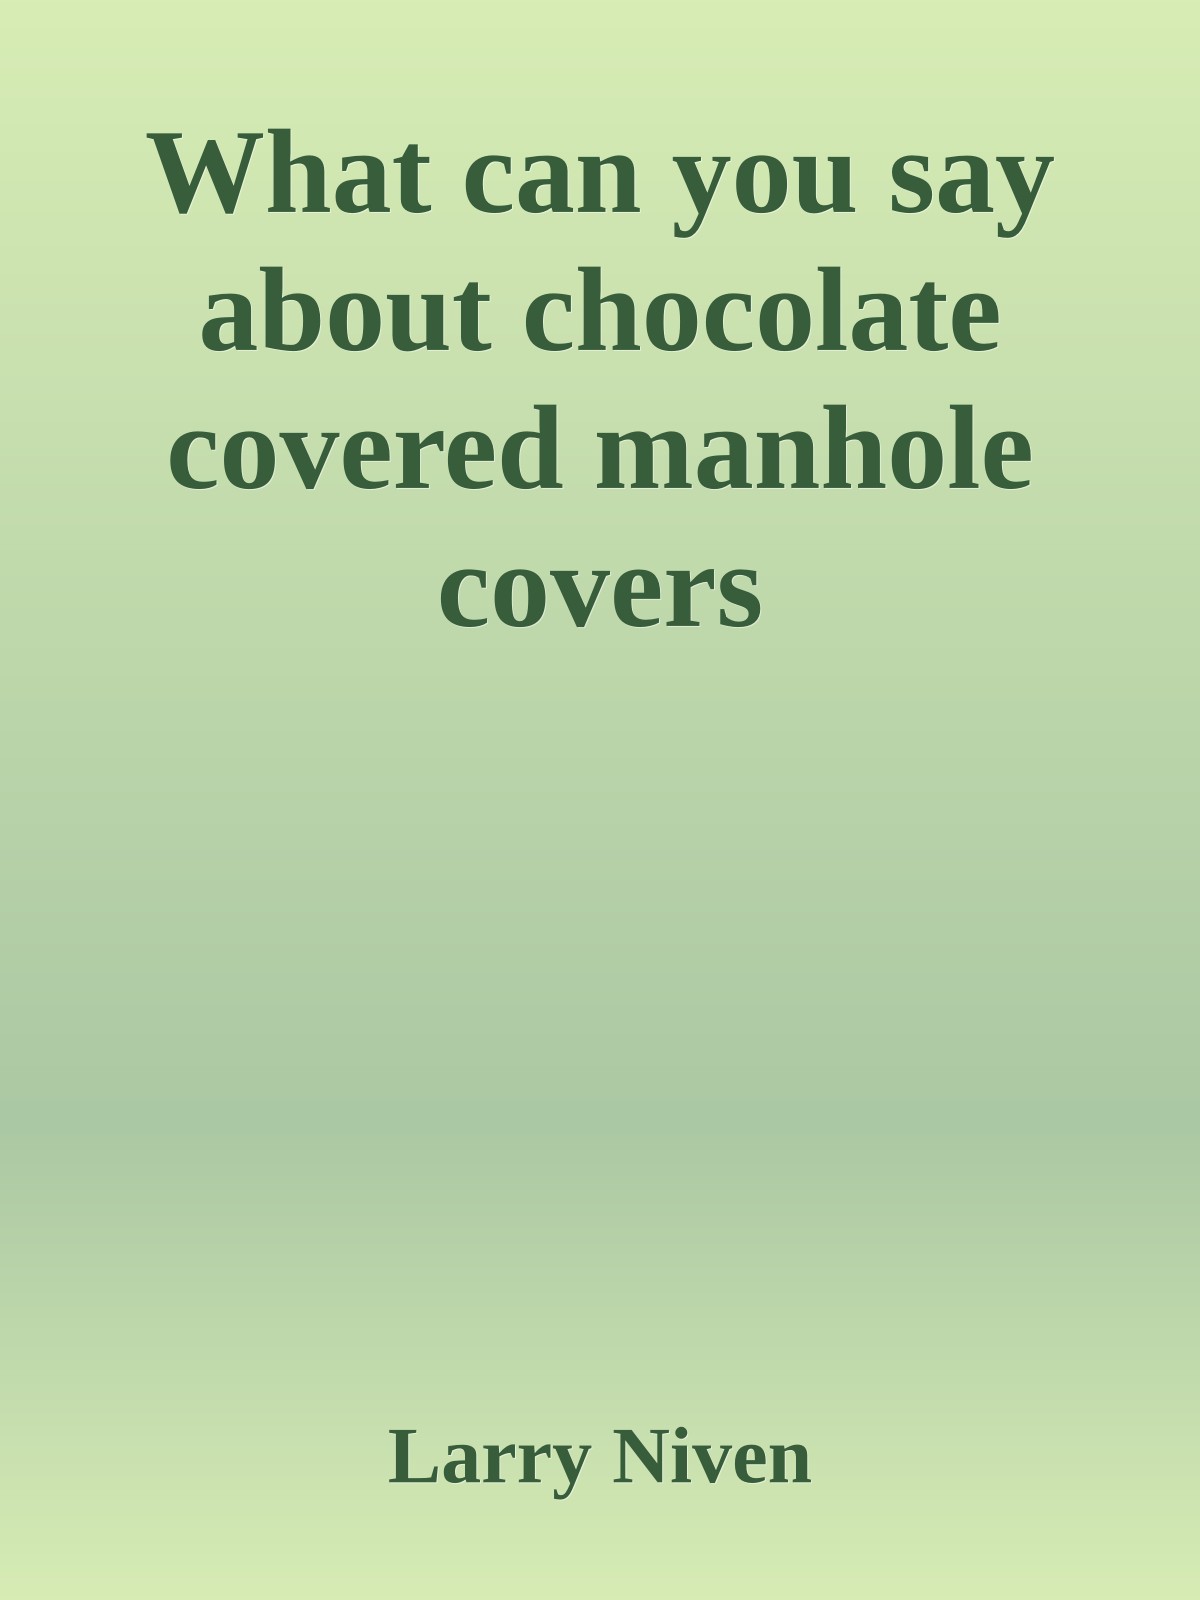 What can you say about chocolate covered manhole covers